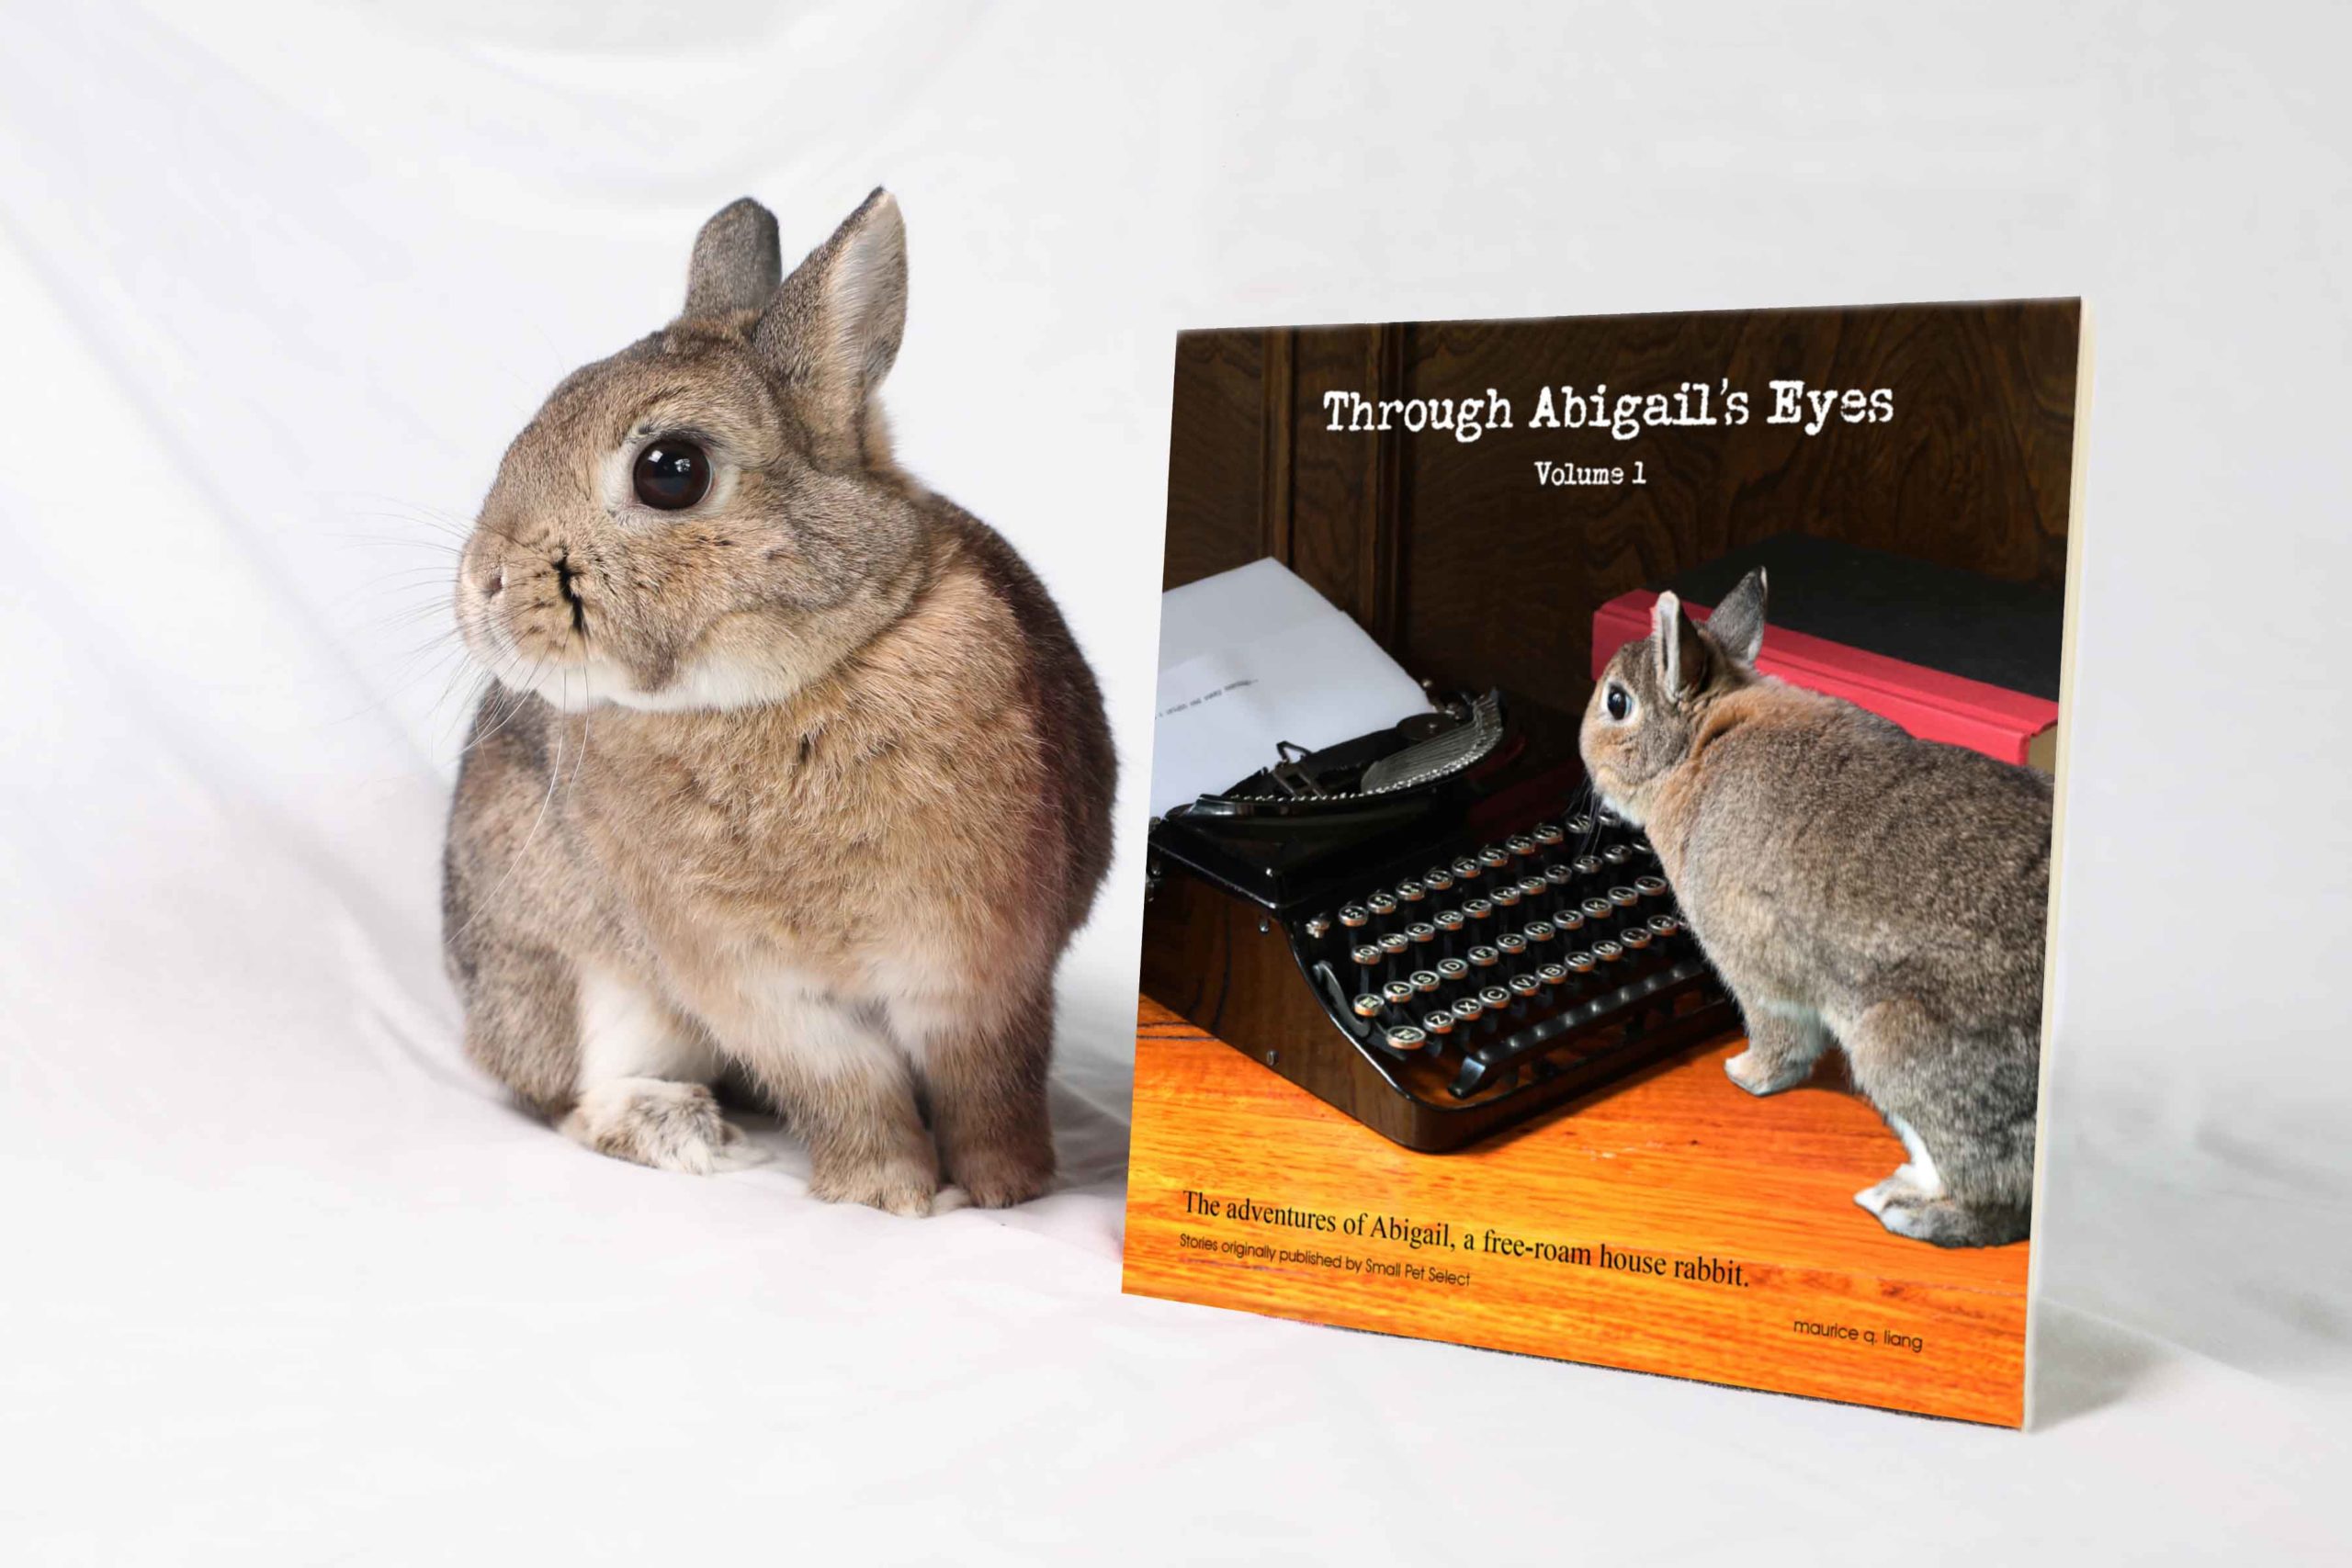 Abigail publishes her first book!